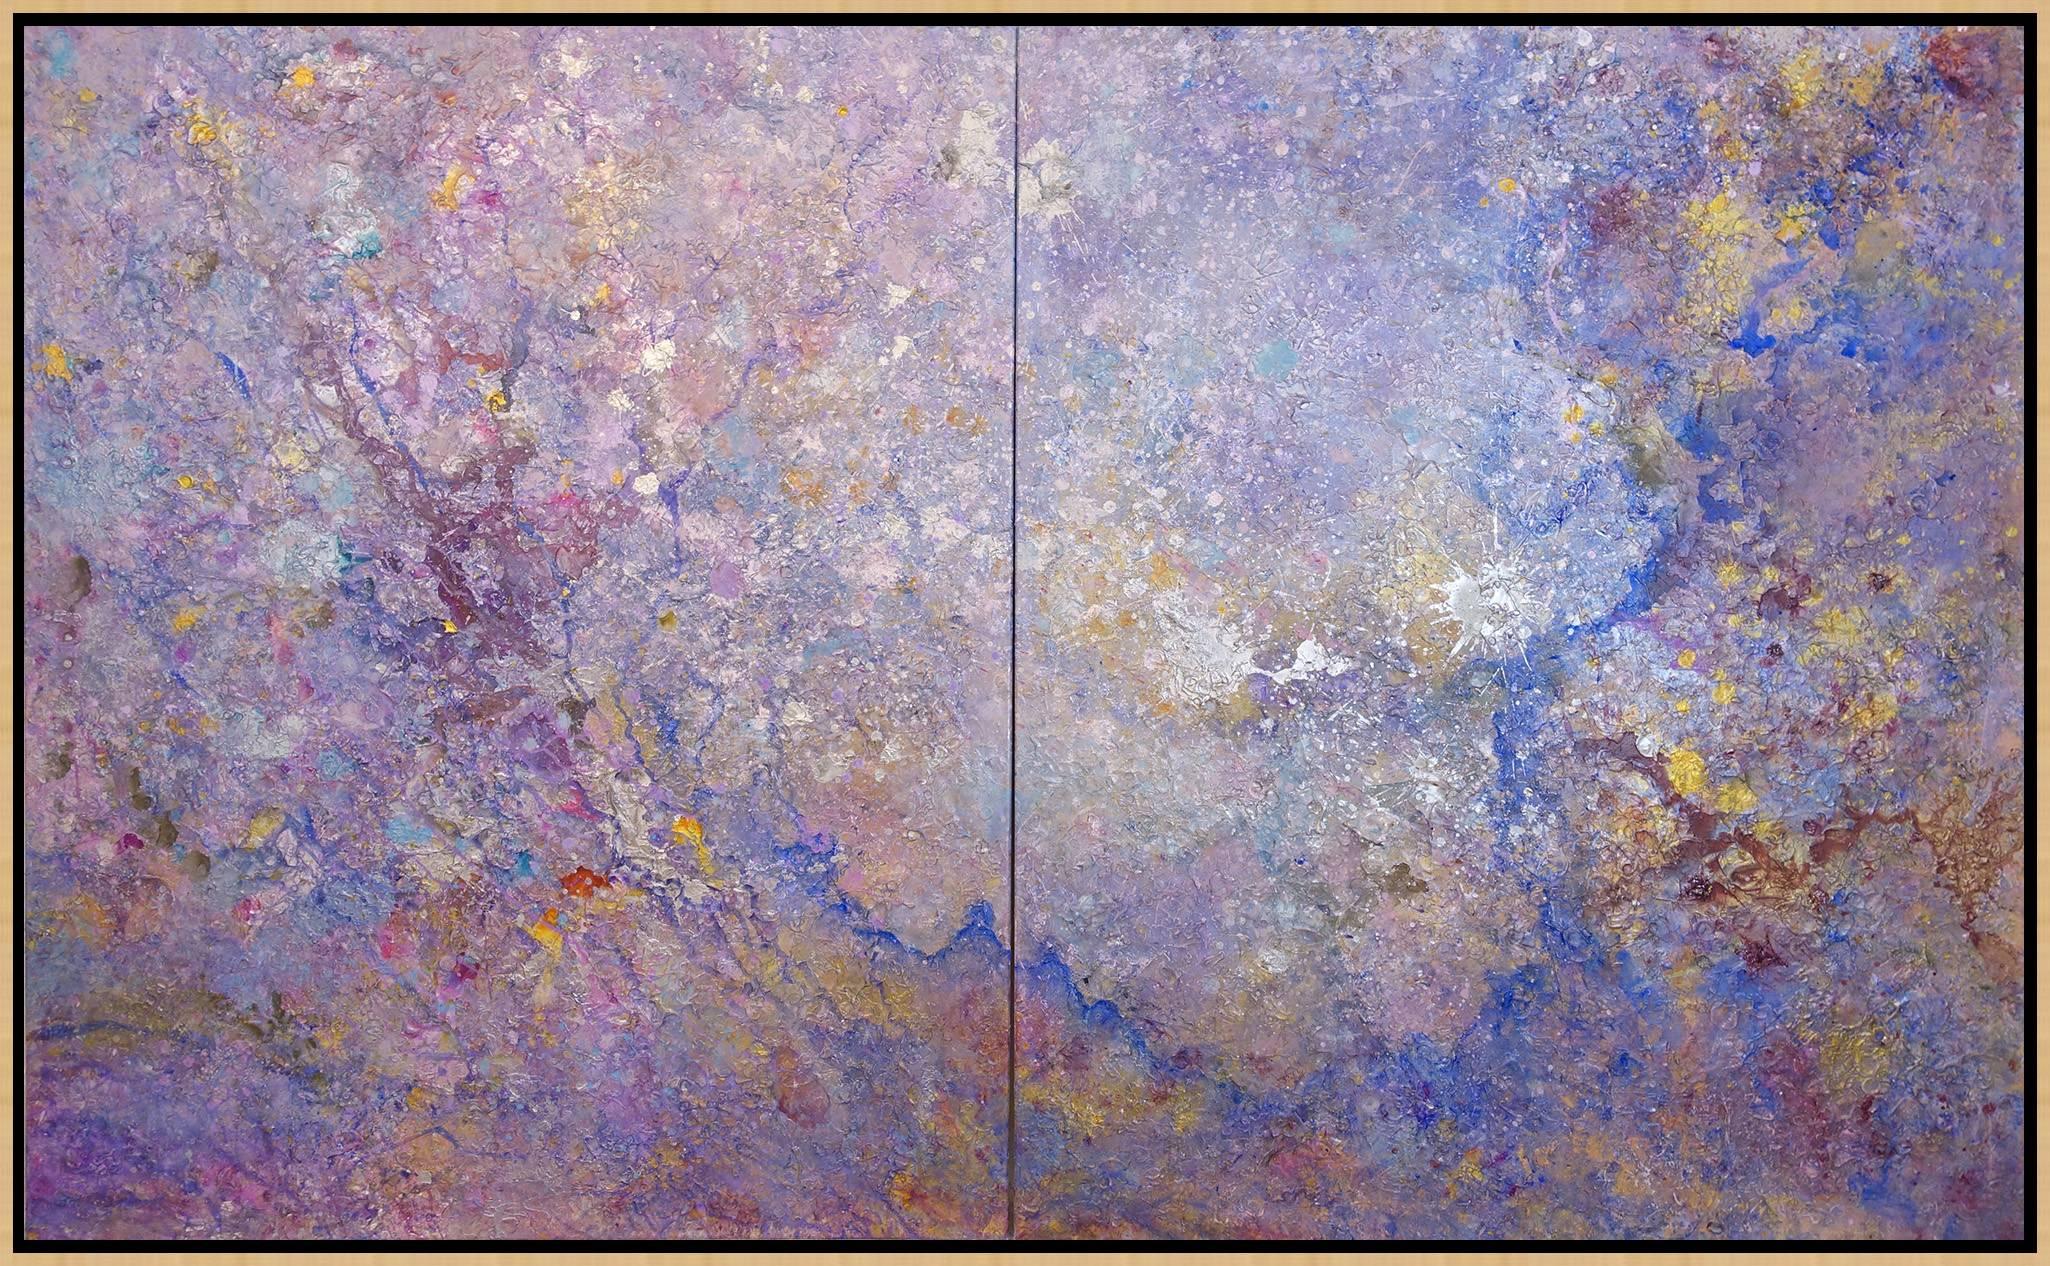 Looking Glass (Purple, Violet, Blue, Gold, Abstract Expressionist Painting) - Gray Abstract Painting by Jill S. Krutick